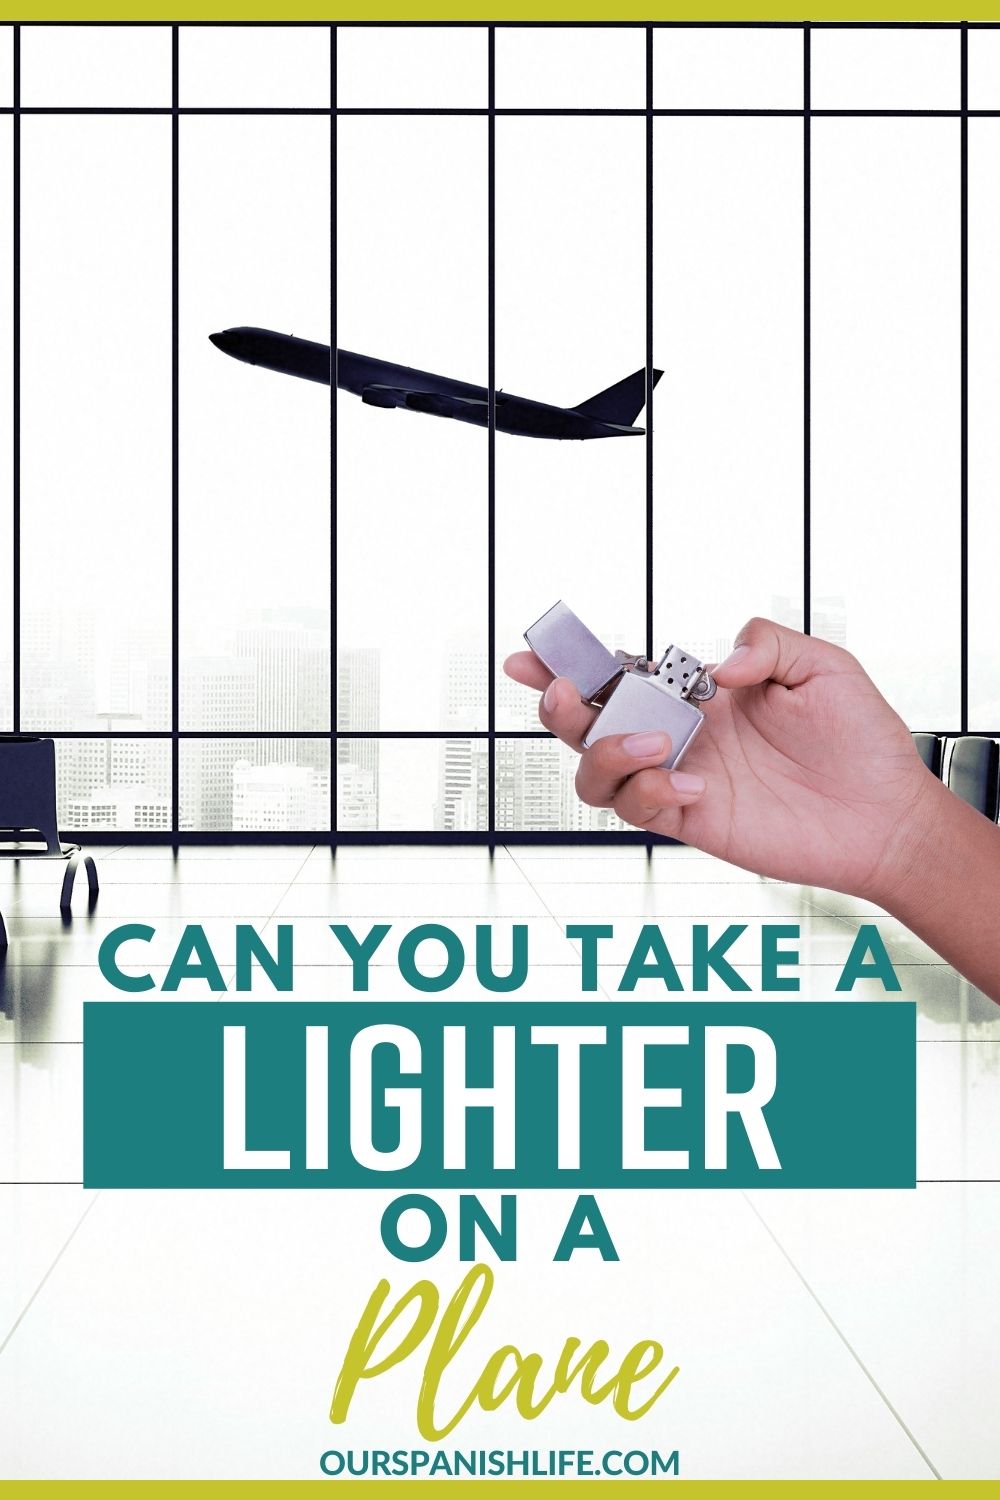 Image showing a hand holding a lighter with text overlay that reads Can you take a lighter on a plane, and a background of airport waiting area and a plane